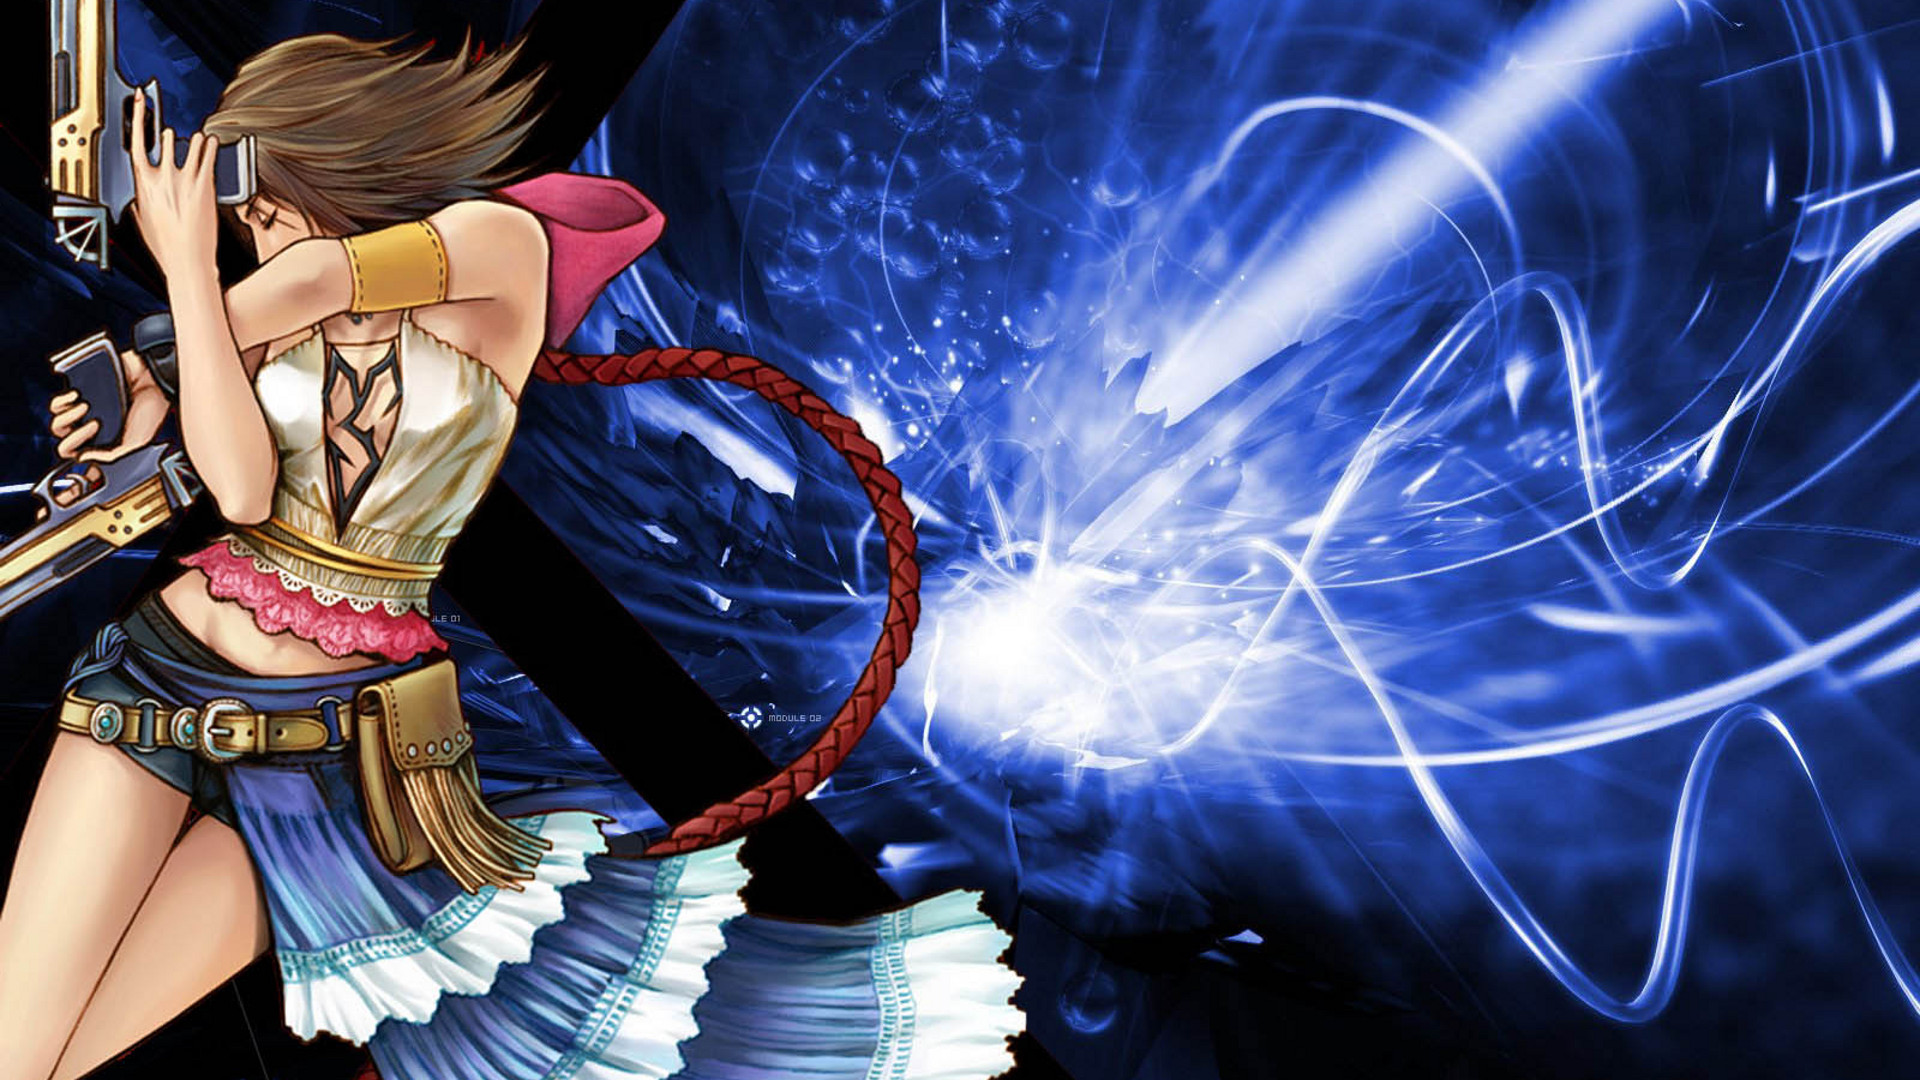 Video Game Final Fantasy X-2 HD Wallpaper | Background Image